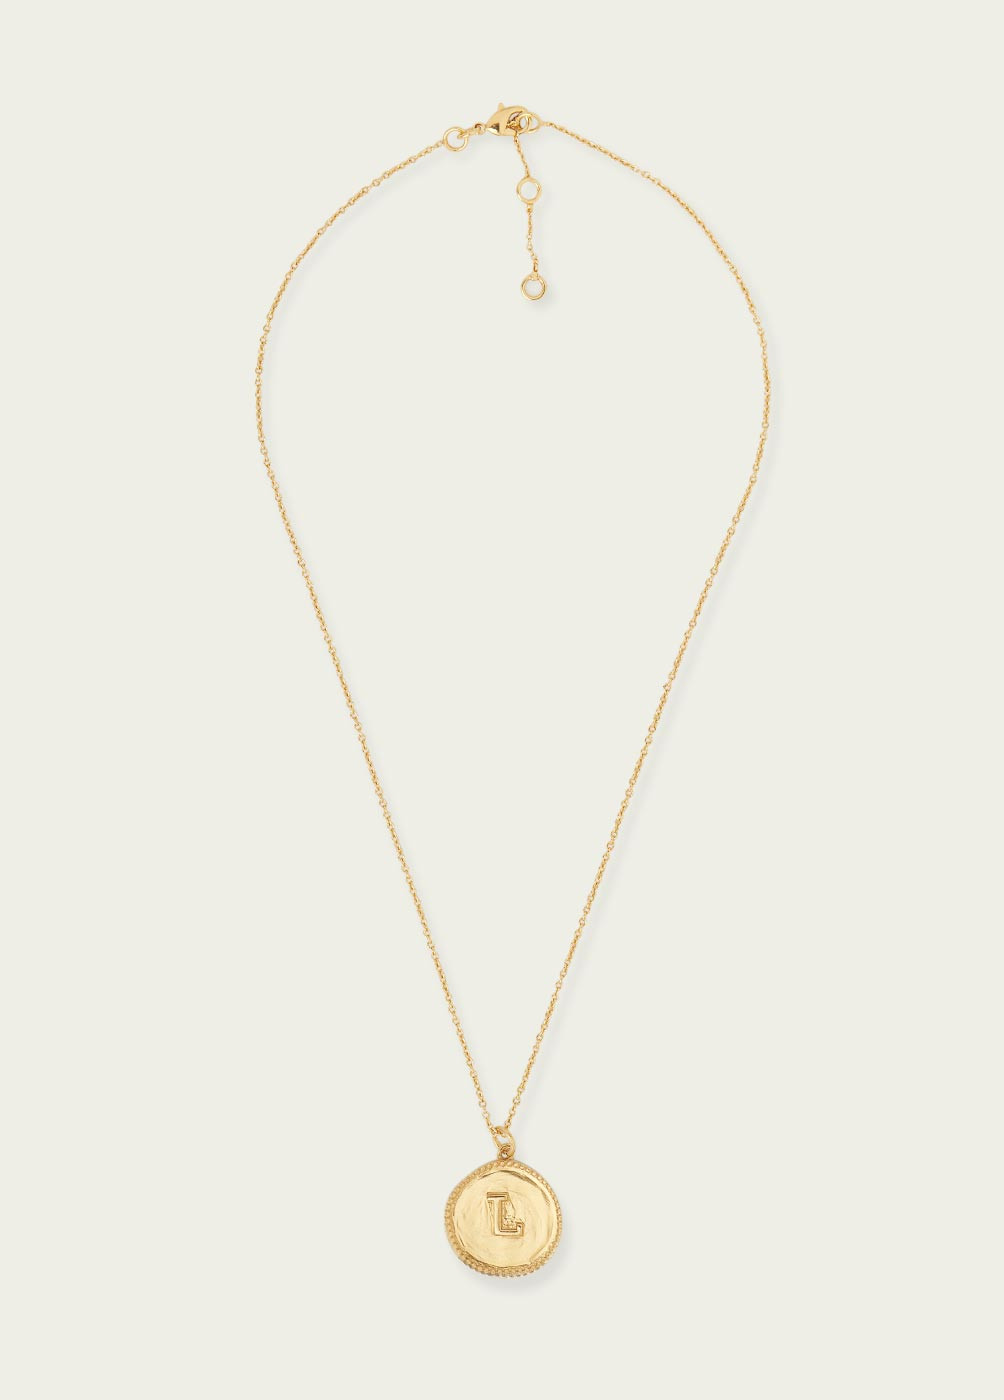 'L' INITIAL MEDALLION NECKLACE